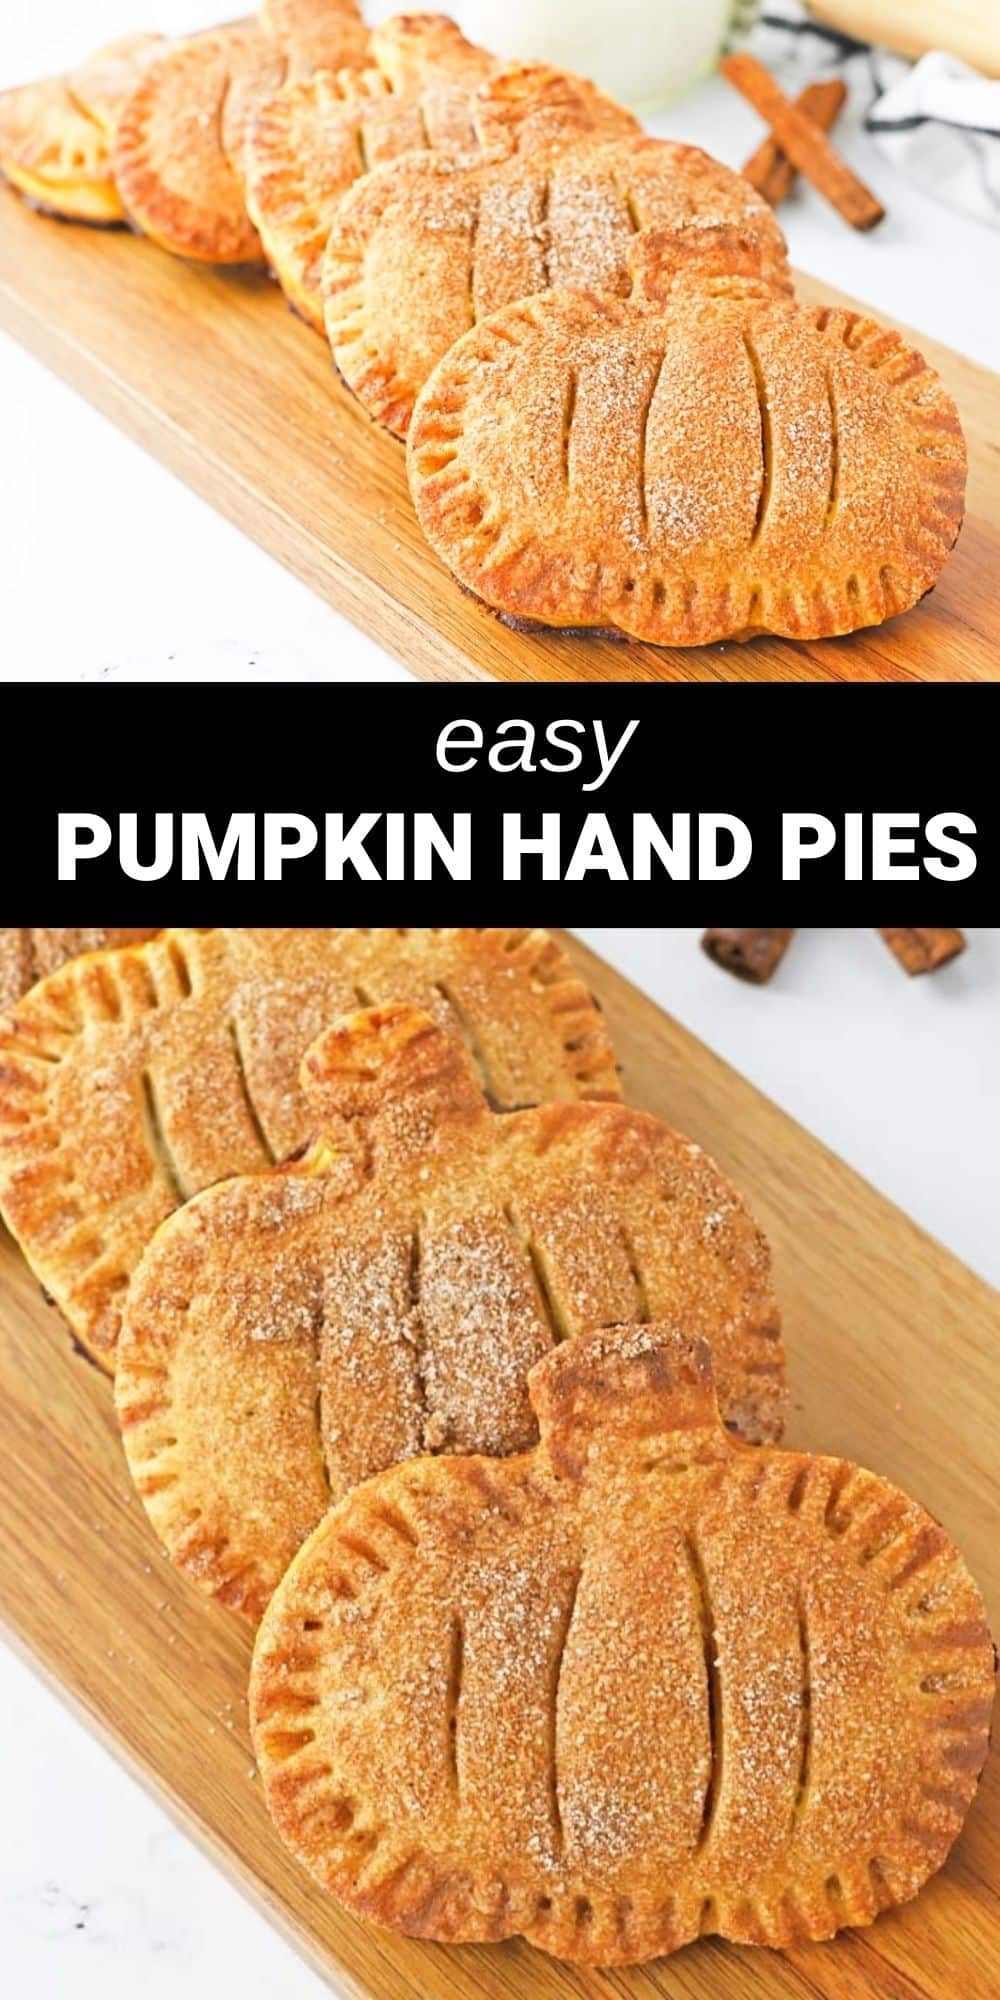 These adorable pumpkin hand pies are the perfect way to celebrate fall. They’re a cute and portable sweet treat with a flaky crust and a filling that’s packed with delicious pumpkin spice flavor.